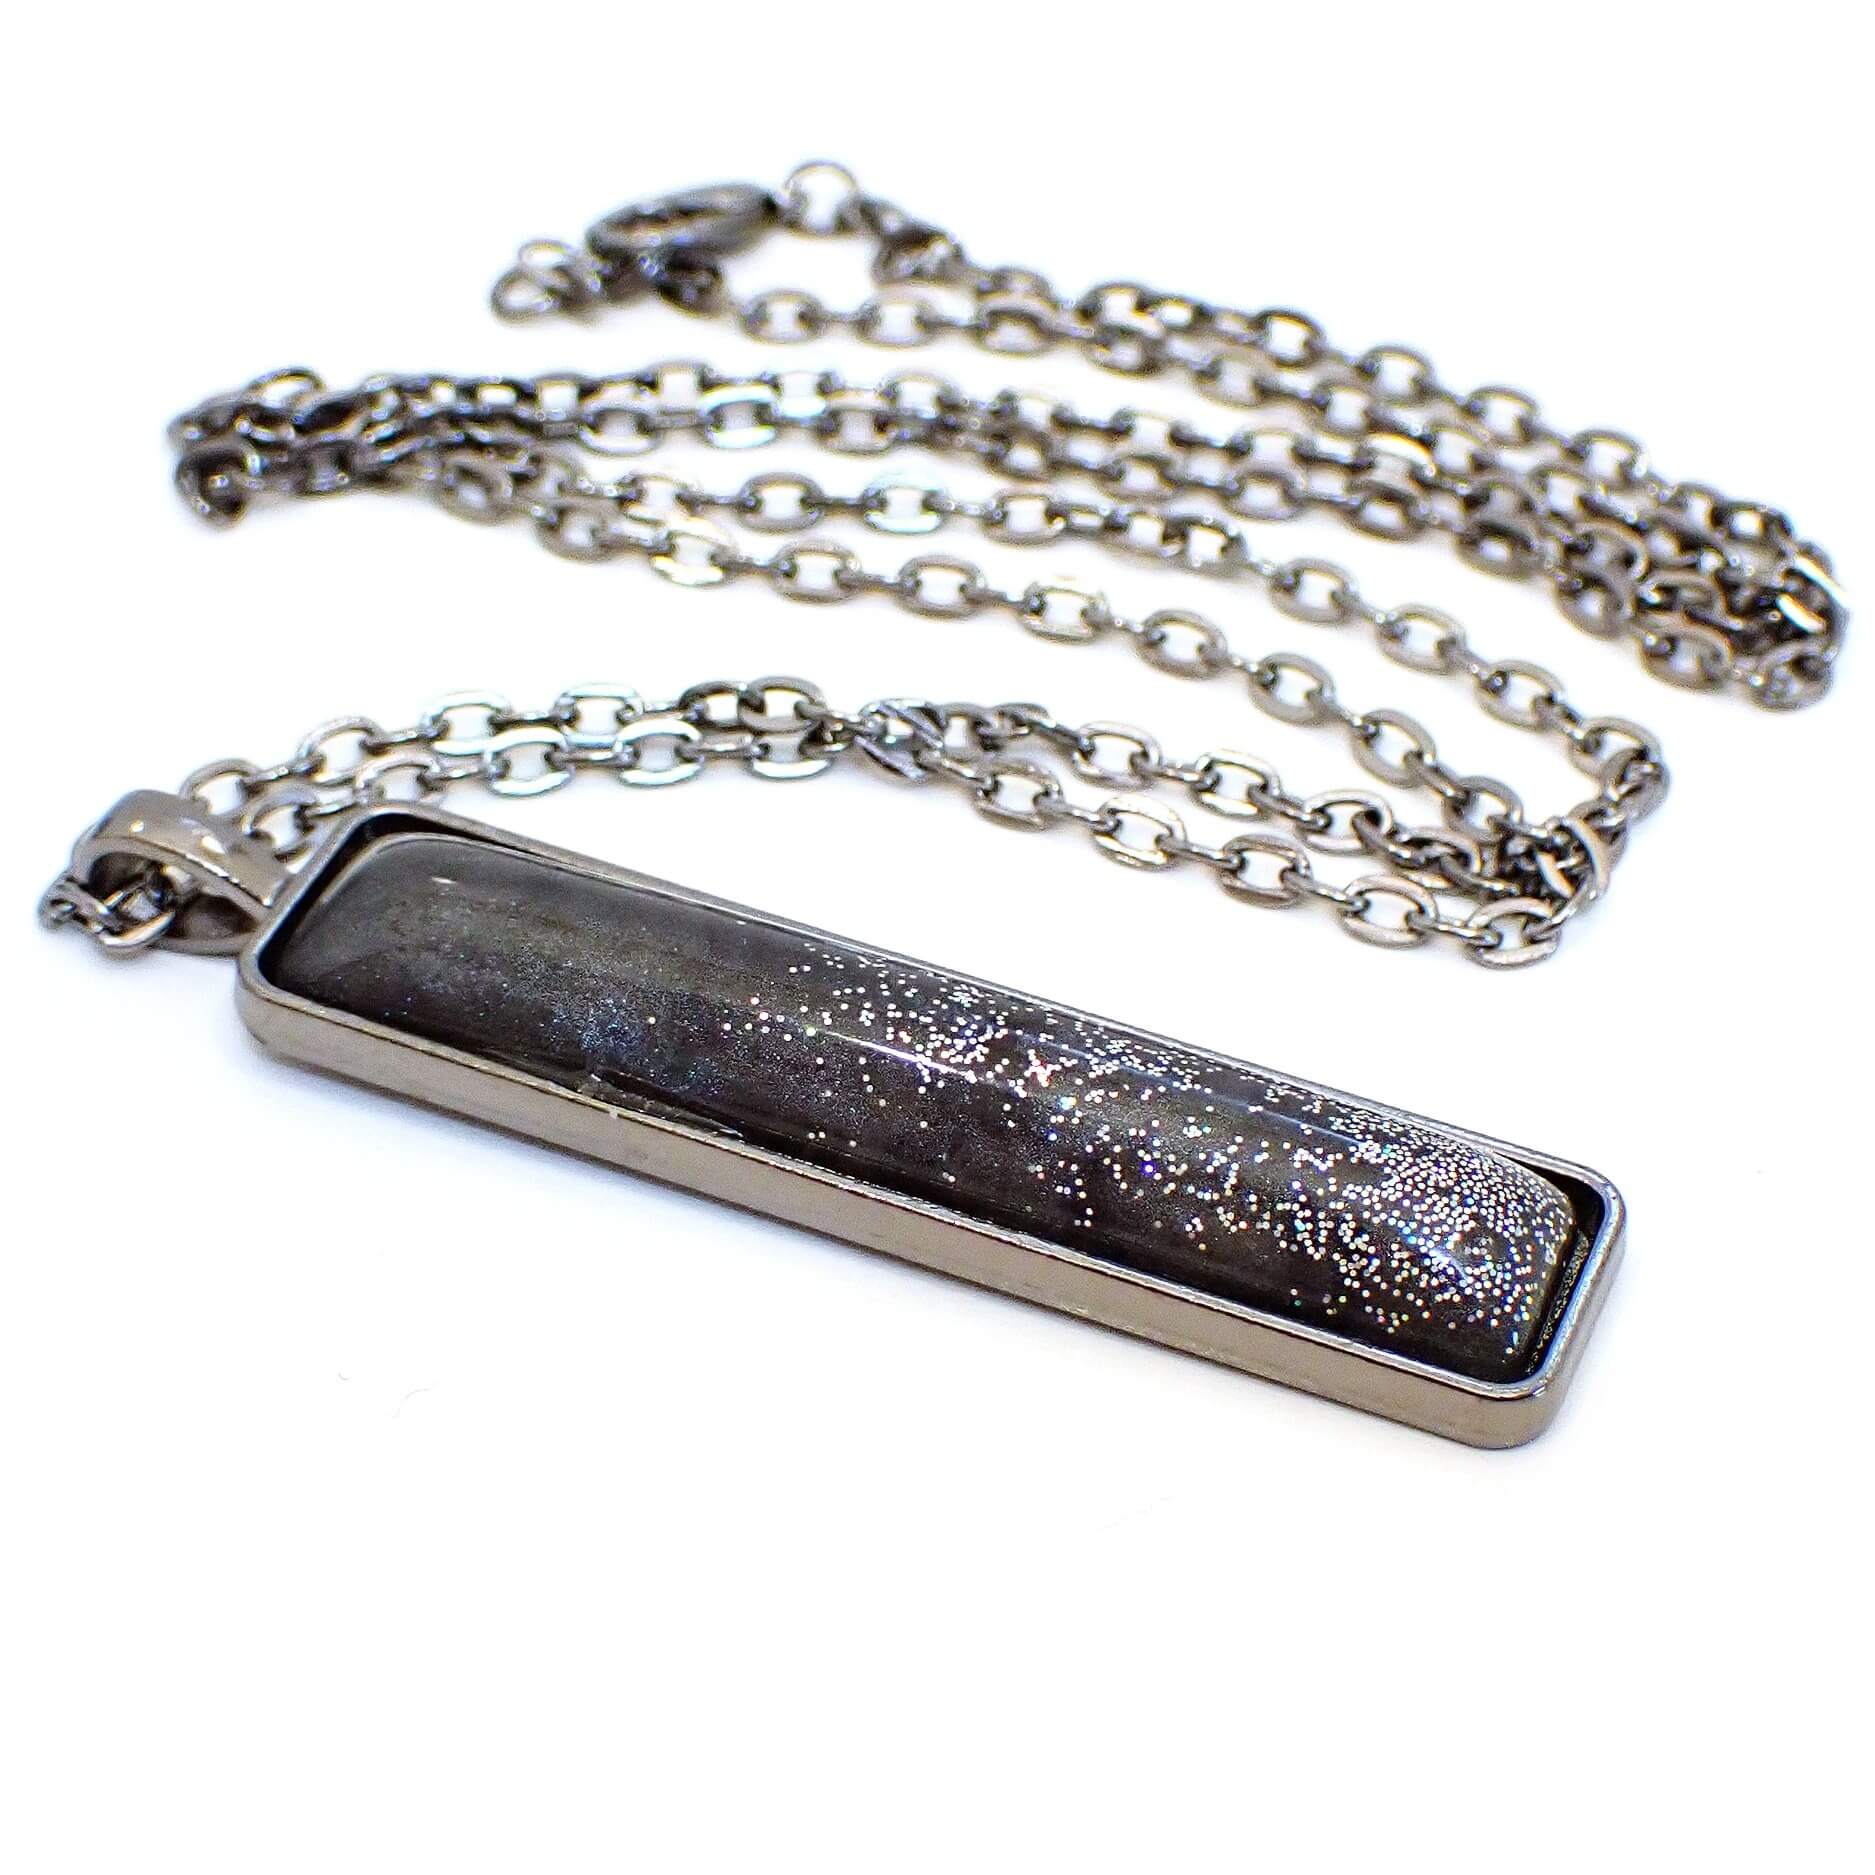 Angled view of the handmade resin bar pendant necklace. The metal is gunmetal gray in color. The long rectangle pendant has rounded edges and a handmade resin cab on the front. The resin cab has pearly dark gray resin with tiny flecks of holographic glitter at the bottom half of the pendant.